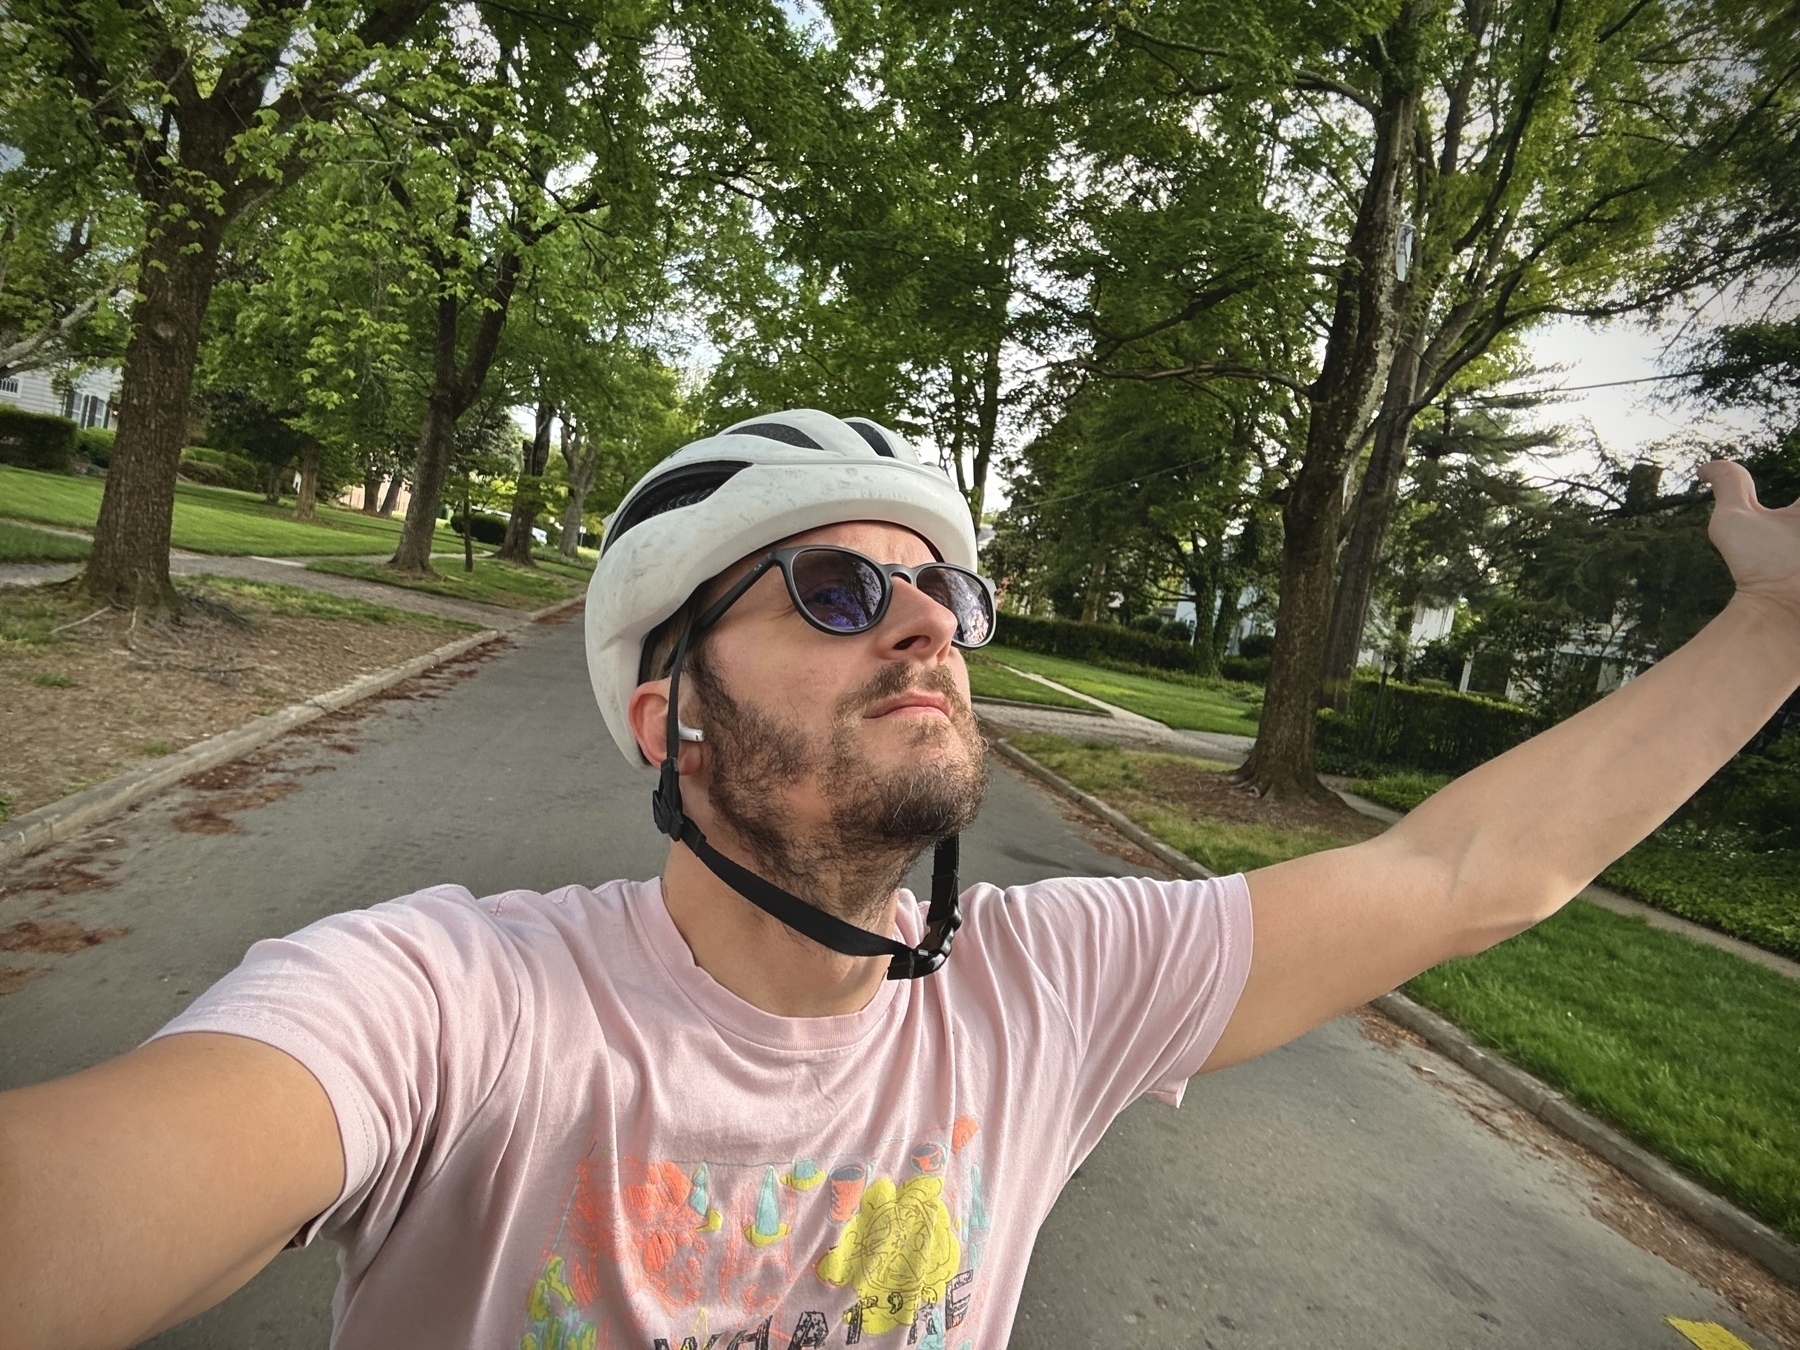 Just me riding a bike in a pink shirt doing a like “freeeedom!” sort of gesture. Or maybe like a “everything the light touches” situation?